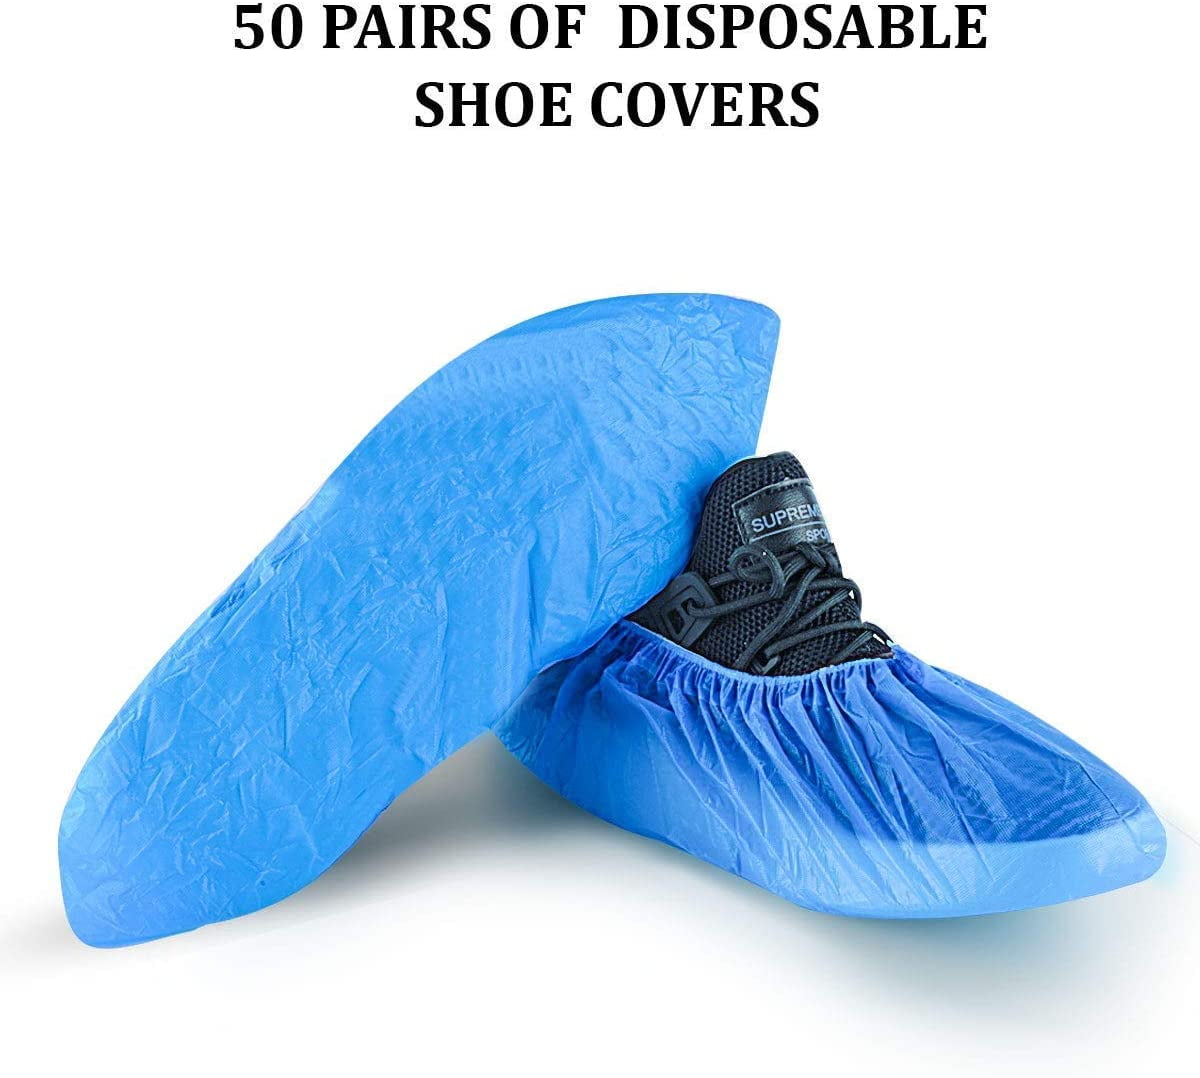 200x Waterproof Boot Covers Disposable Shoe Cover Elastic Protect Overshoes US 